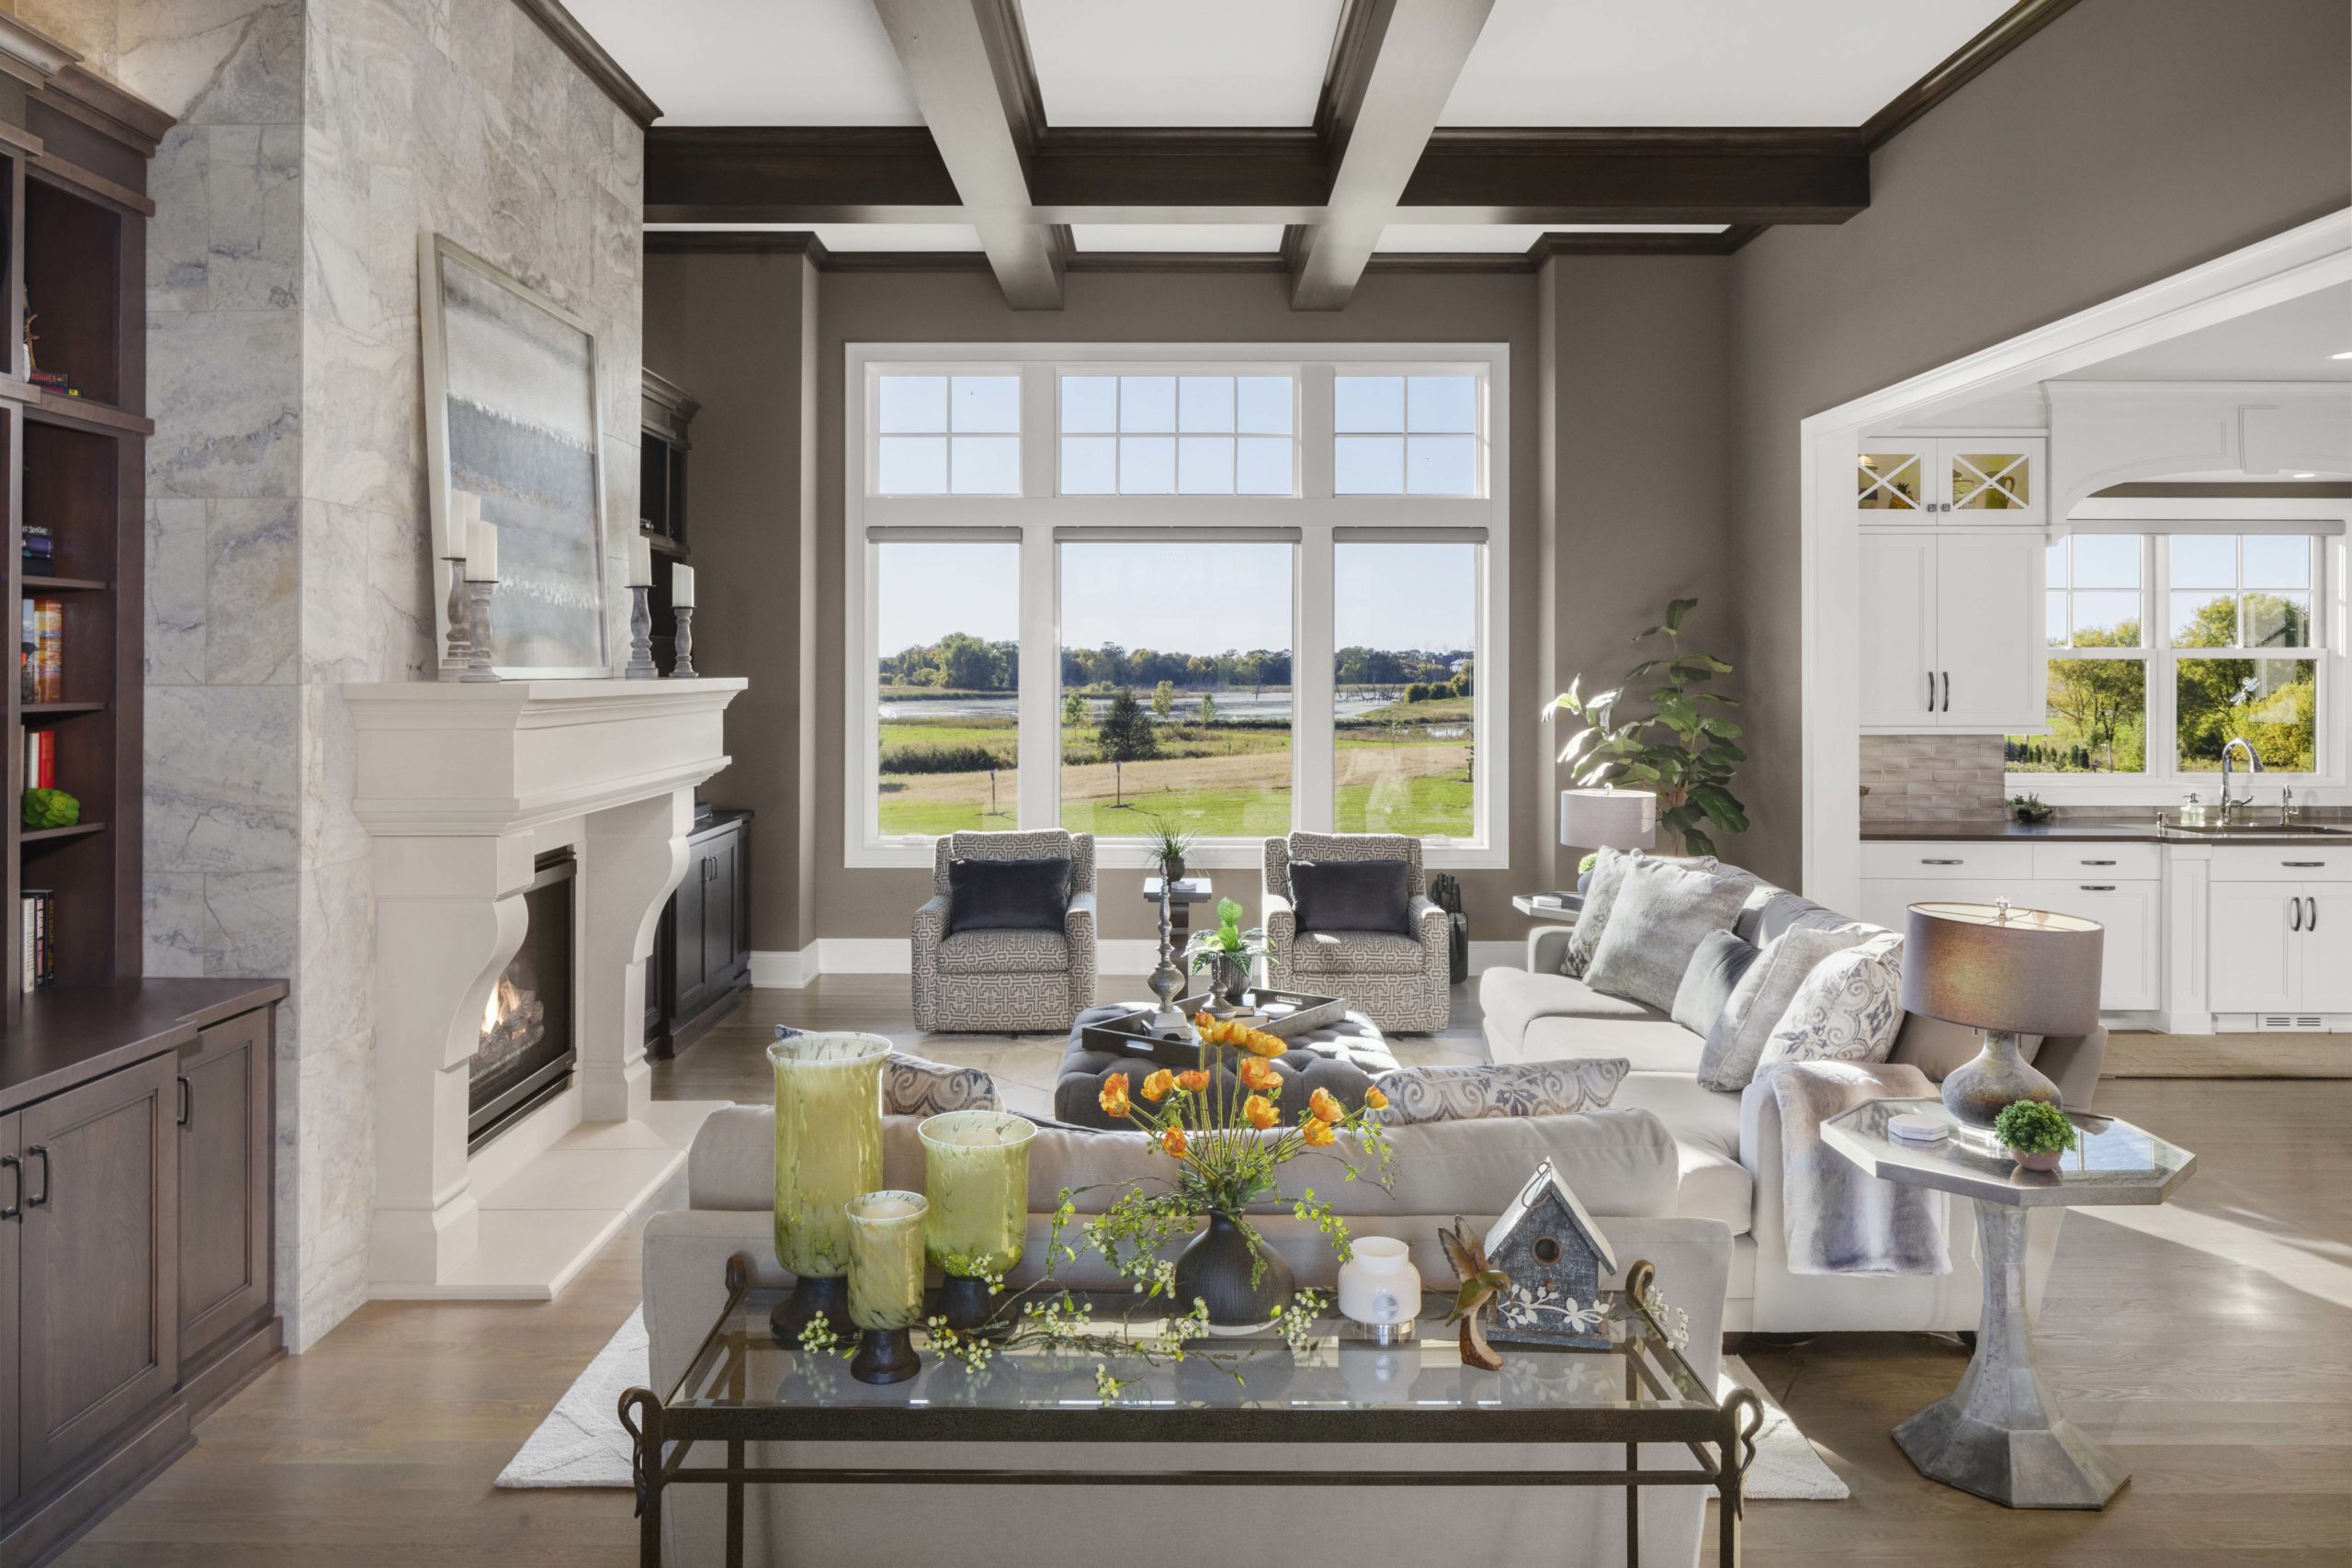 A prairie-style living room with a fireplace and large windows in a custom home.